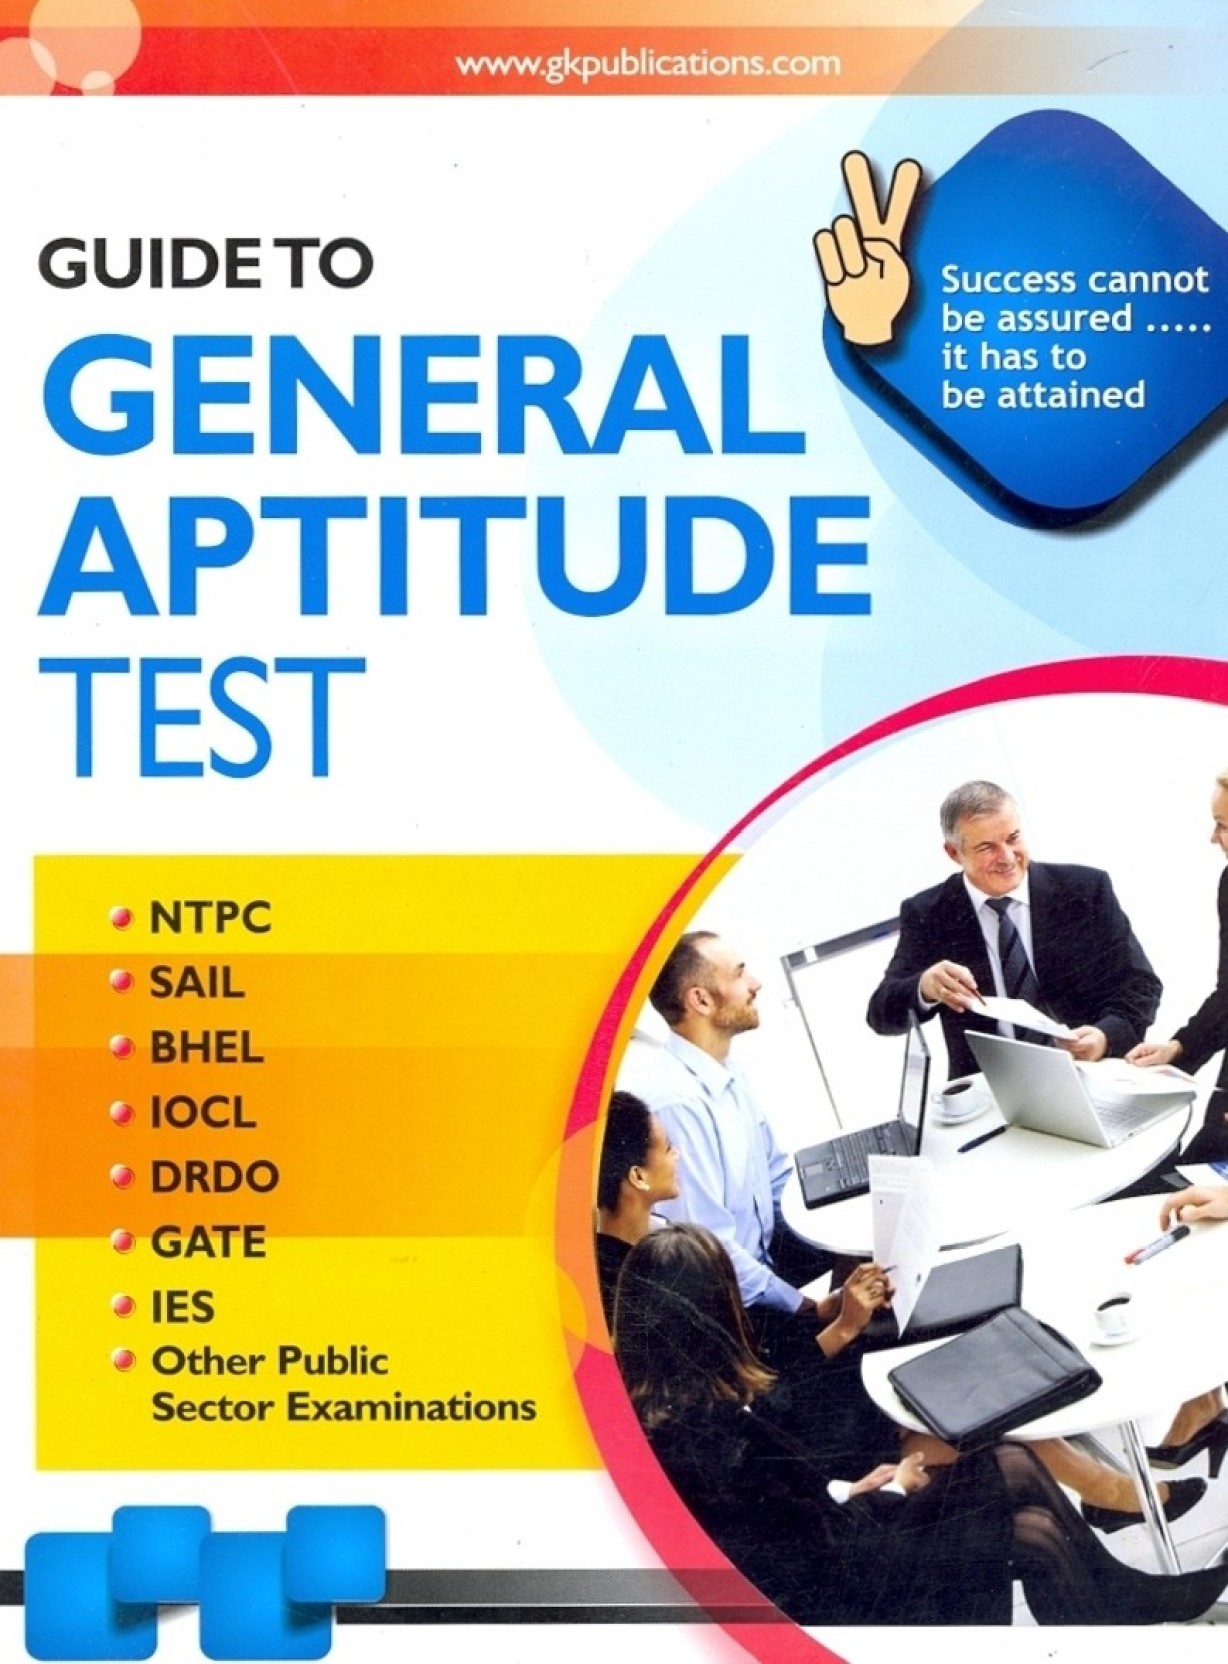 GUIDE TO GENERAL APTITUDE TEST FOR NTPC BHEL SAIL PDF